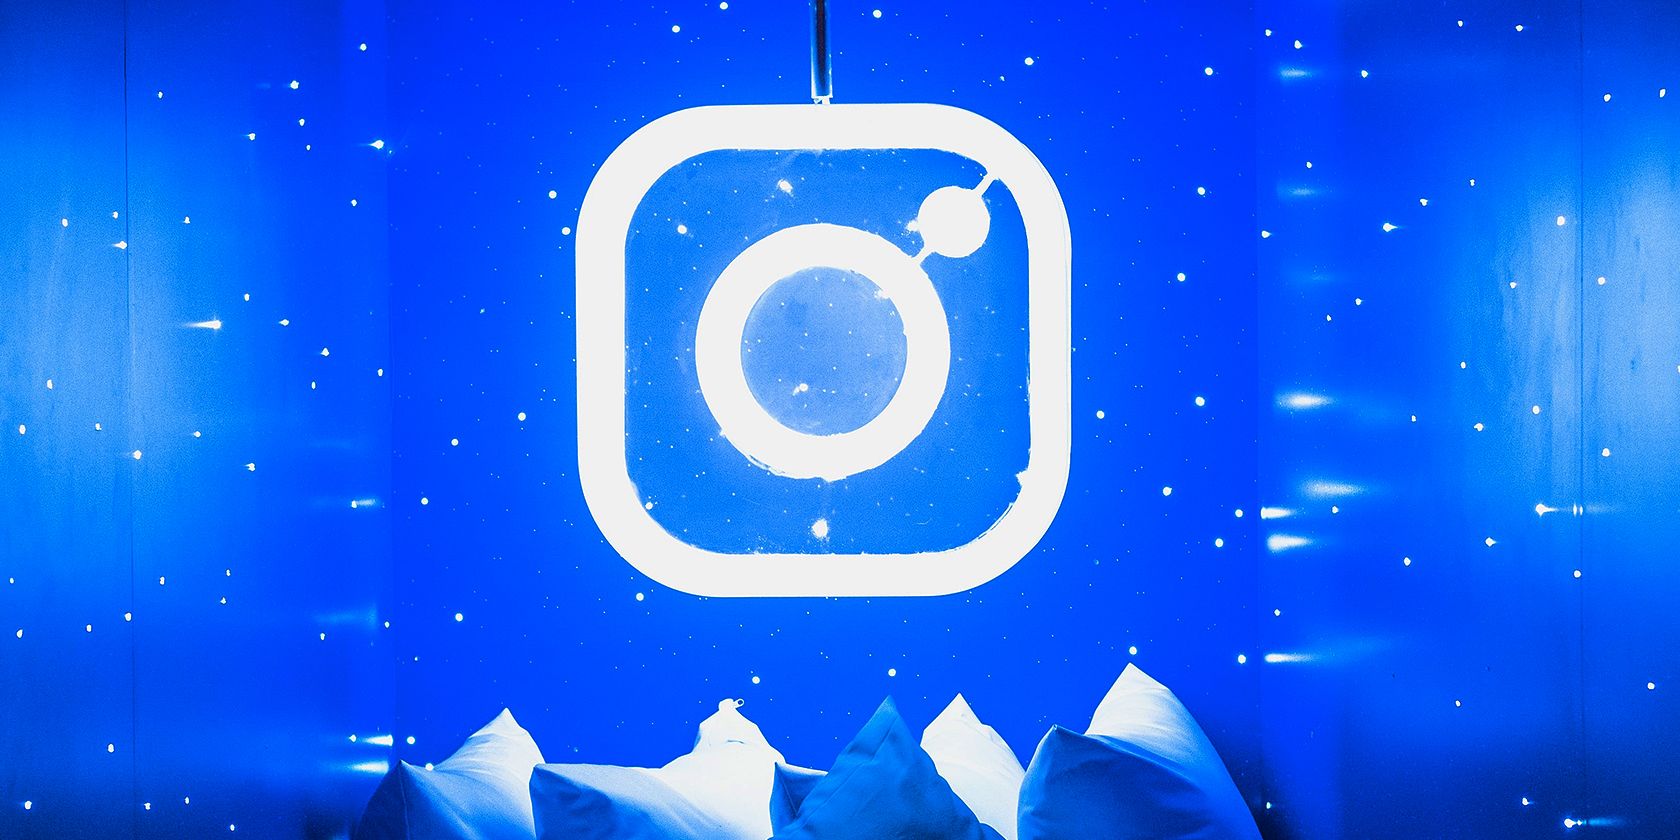 instagram logo in a blue room with white pillows